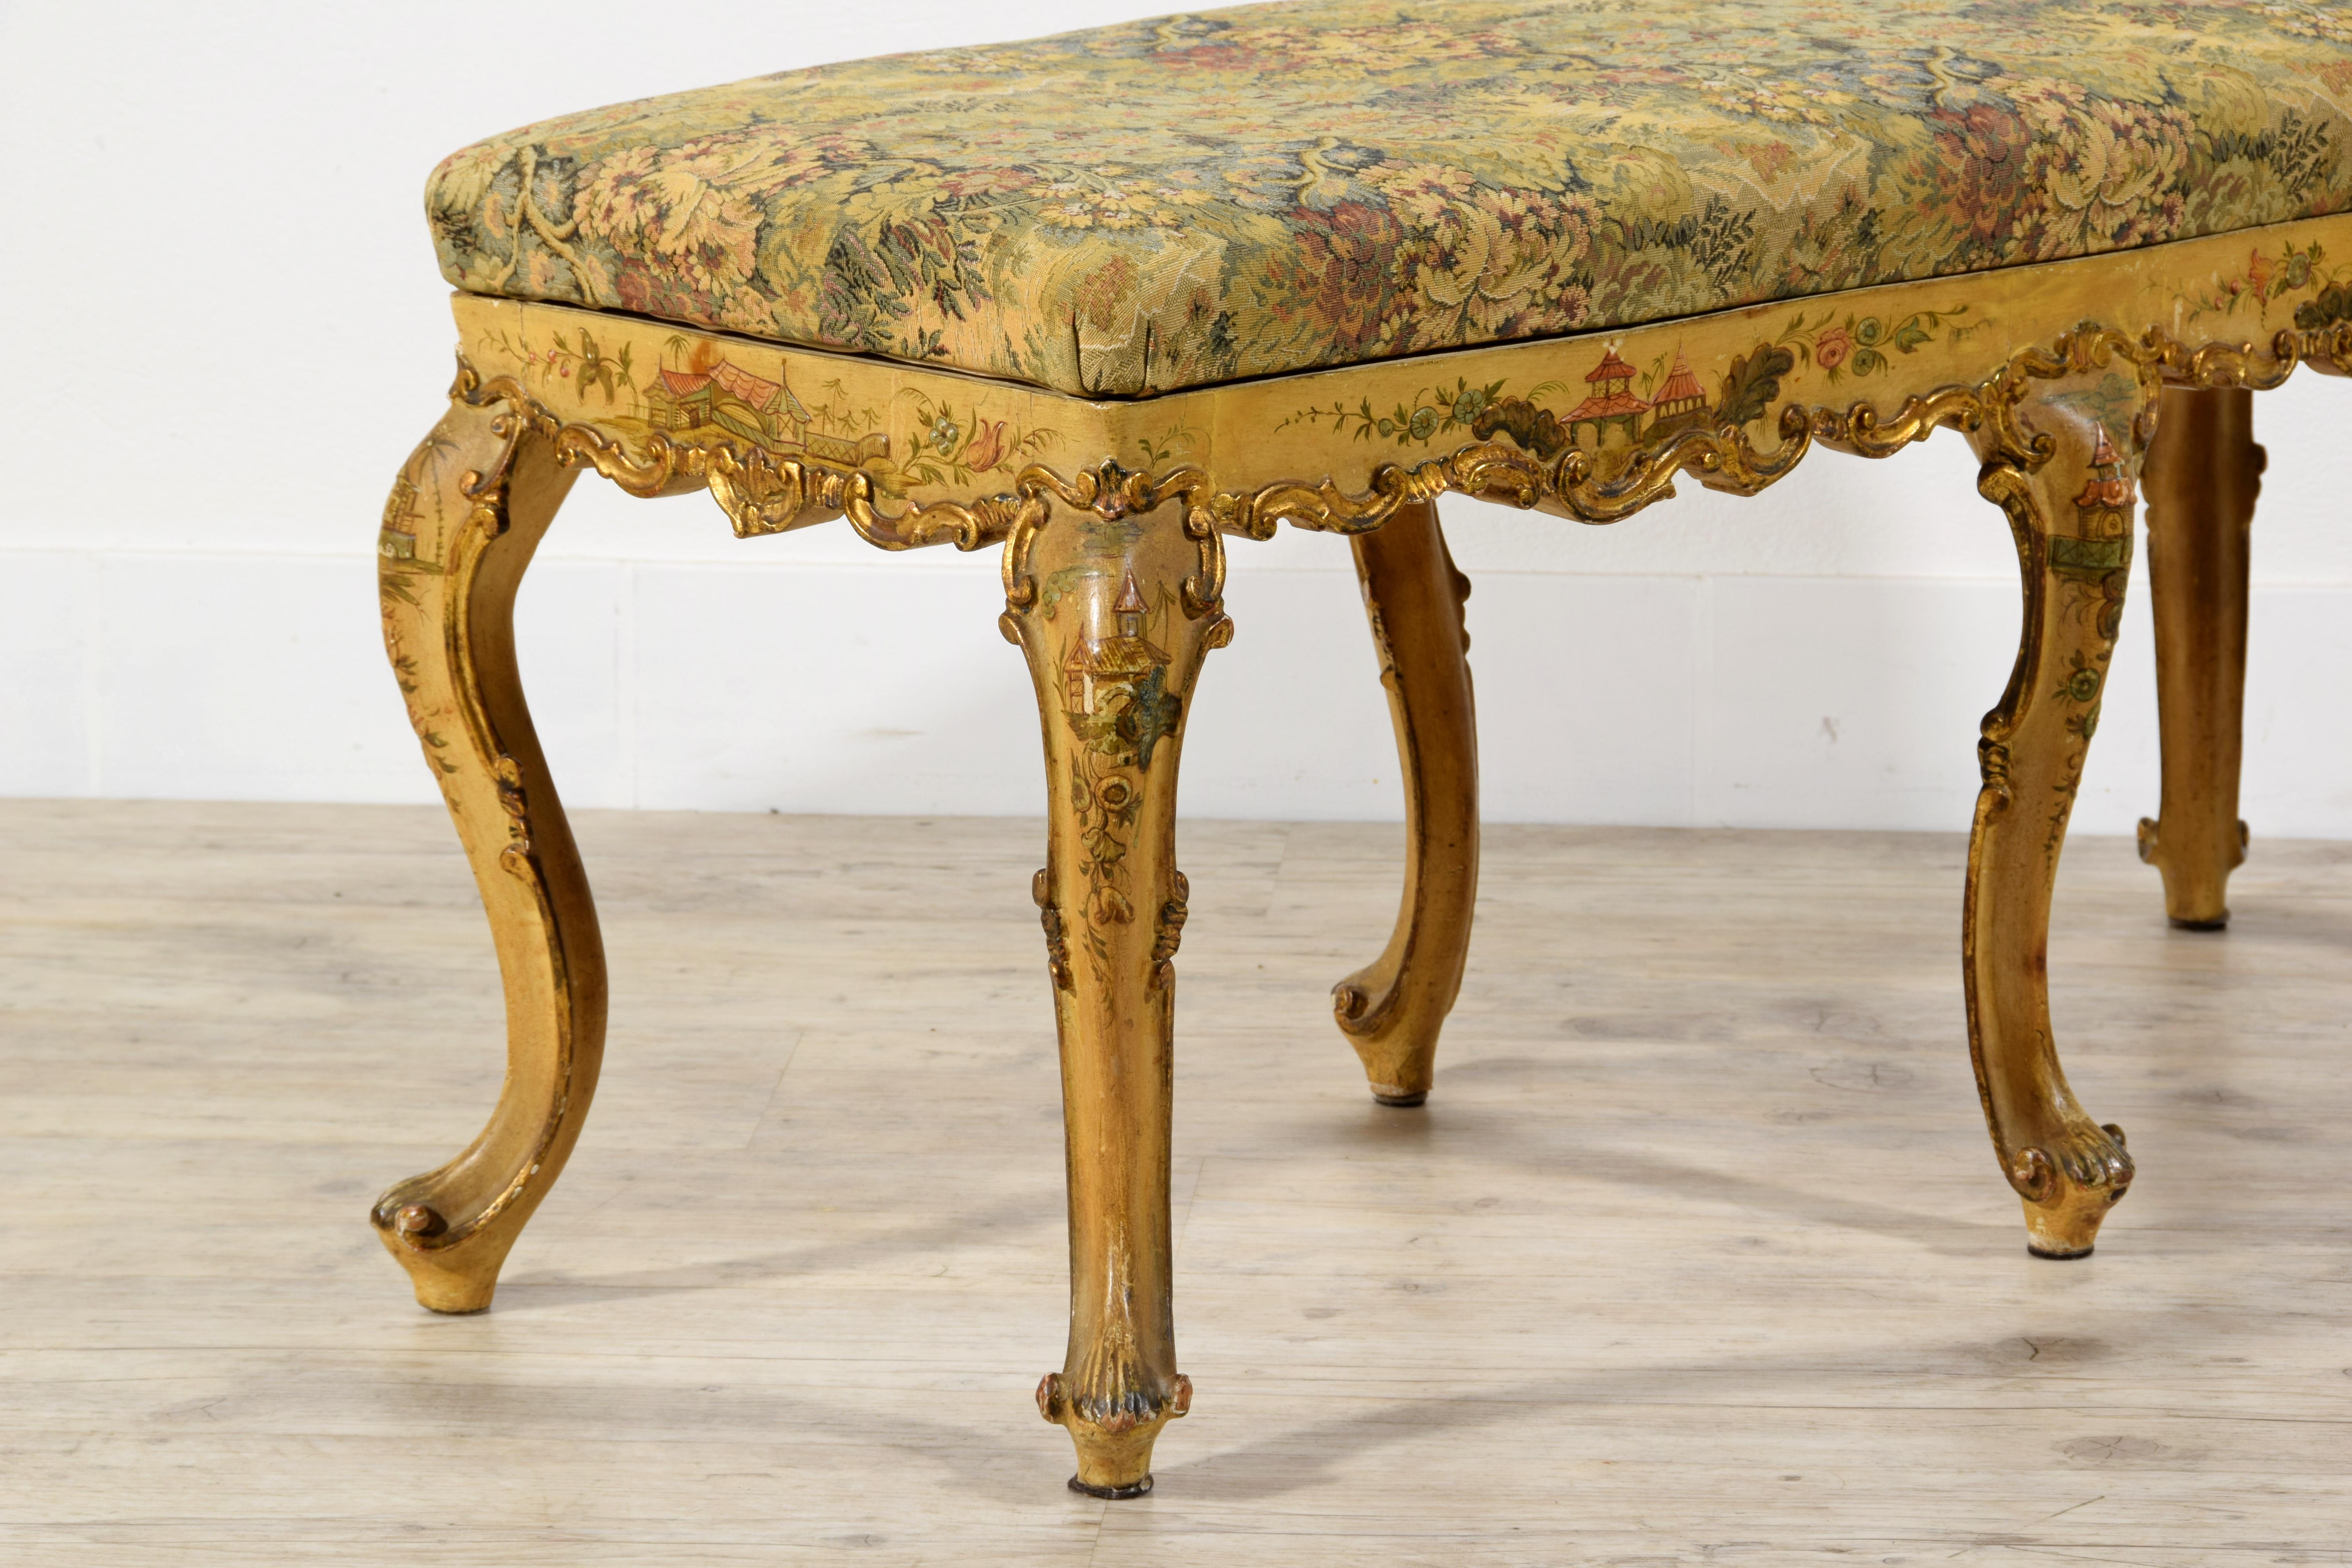 20th Century, Venetian Baroque Stile Carved and Laquered Giltwood Bench For Sale 5